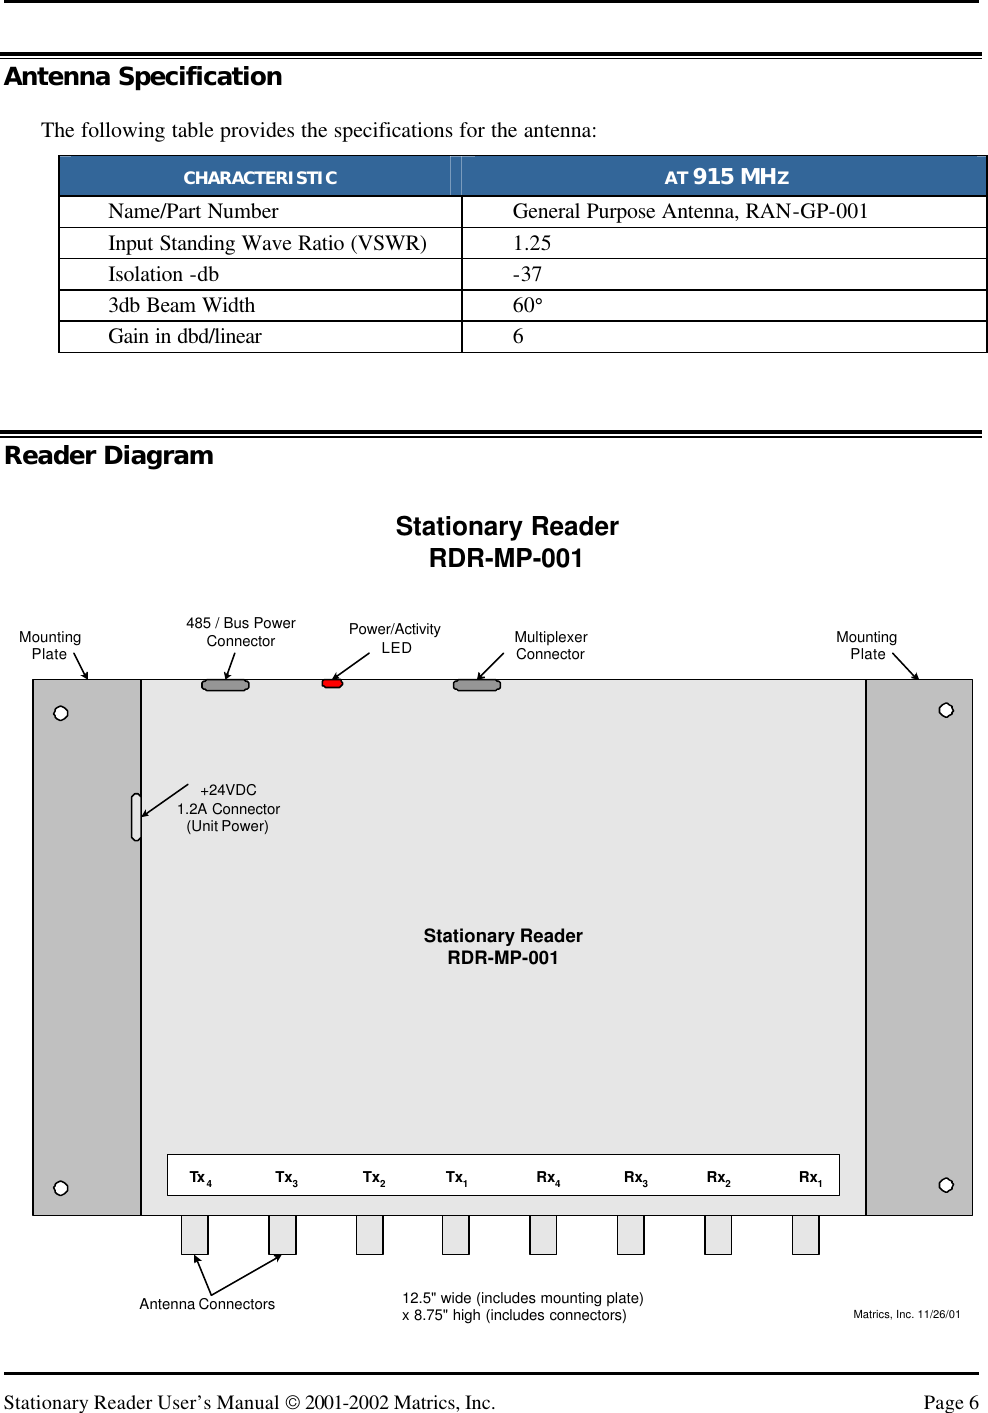   Stationary Reader User’s Manual  2001-2002 Matrics, Inc. Page 6 Antenna Specification The following table provides the specifications for the antenna: CHARACTERISTIC AT 915 MHZ Name/Part Number General Purpose Antenna, RAN-GP-001 Input Standing Wave Ratio (VSWR) 1.25 Isolation -db -37 3db Beam Width 60° Gain in dbd/linear 6  Reader Diagram  Stationary ReaderRDR-MP-001MultiplexerConnectorStationary ReaderRDR-MP-001Matrics, Inc. 11/26/01Tx 4Tx3Tx2Tx1Rx4Rx3Rx2Rx1485 / Bus PowerConnector Power/ActivityLED+24VDC1.2A Connector(Unit Power)MountingPlateMountingPlate12.5&quot; wide (includes mounting plate)x 8.75&quot; high (includes connectors)Antenna Connectors 